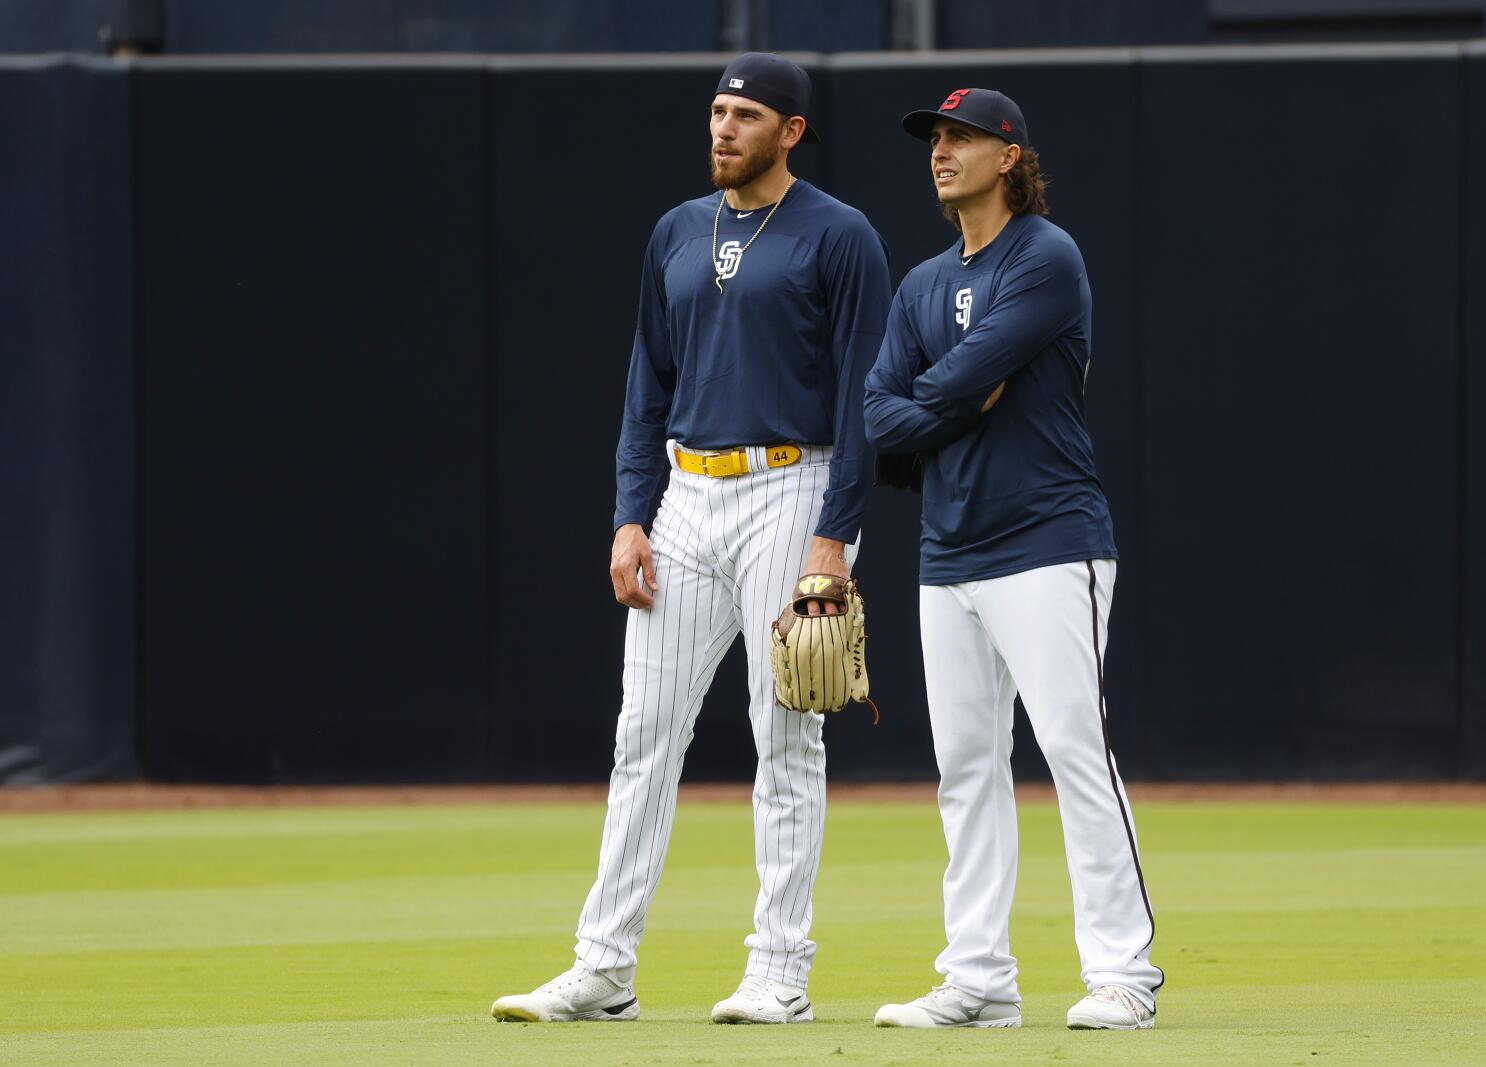 SanBob's Briefing: Speaking of Ritchey, Campusano, Weathers, Musgrove,  Tatis and the Braves, by FriarWire